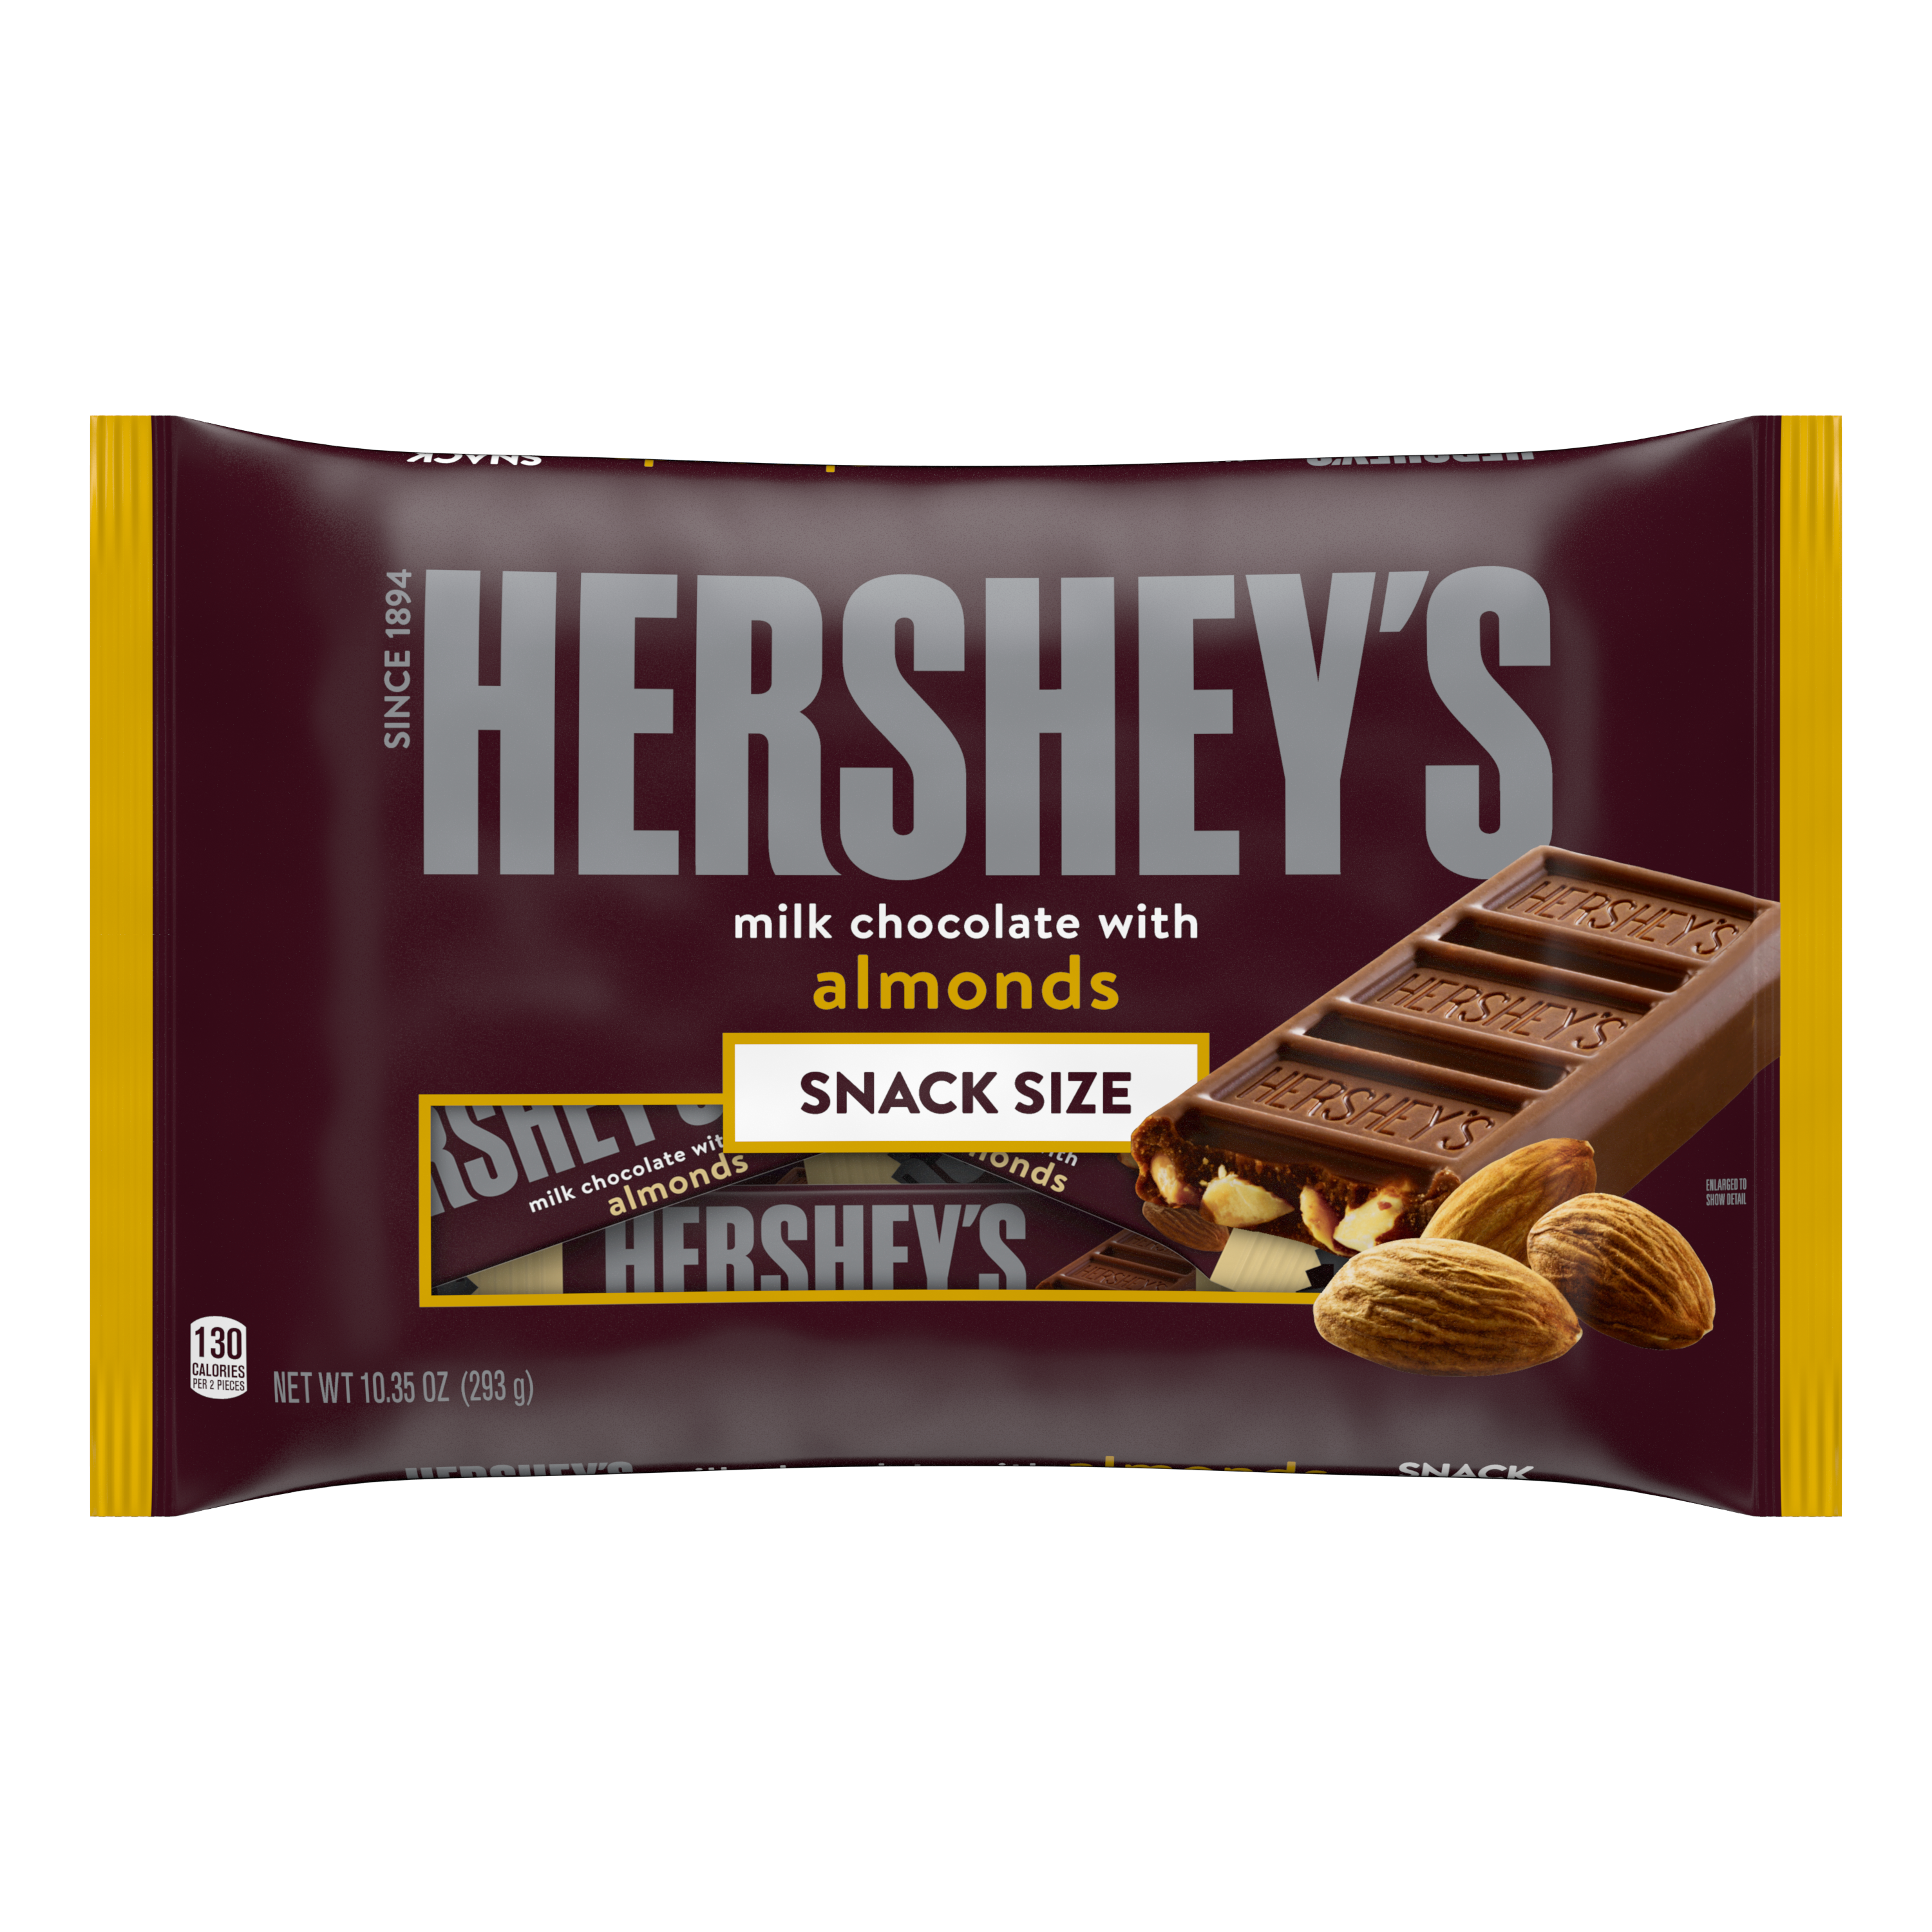 HERSHEY'S Milk Chocolate with Almonds Snack Size Candy Bars, 10.35 oz bag - Front of Package